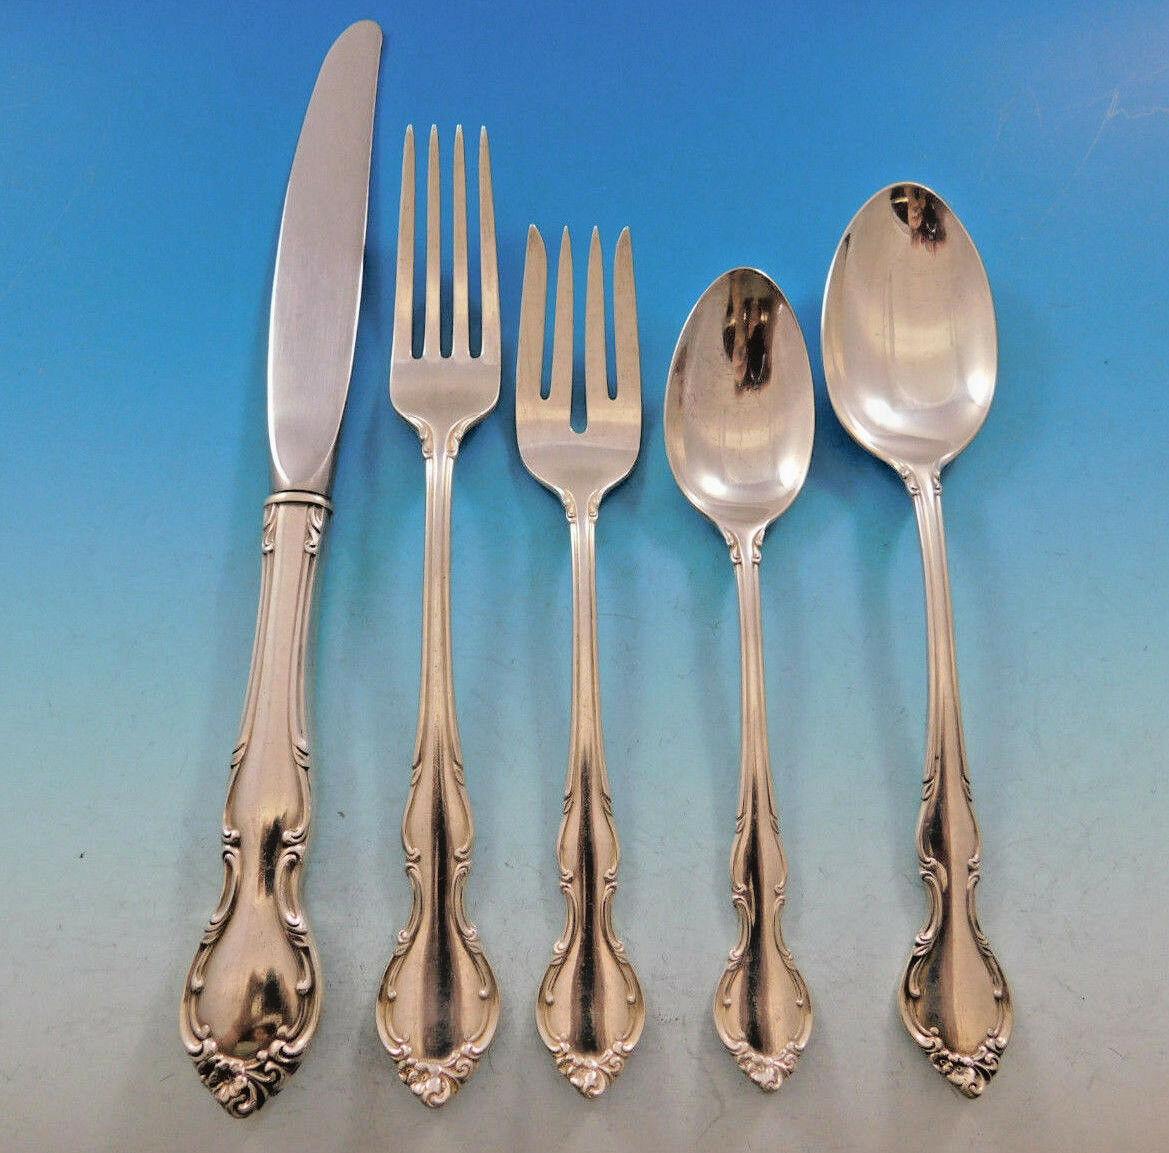 Stunning Pirouette by Alvin sterling silver flatware set - 64 pieces. This set includes:

12 knives, 9 1/4